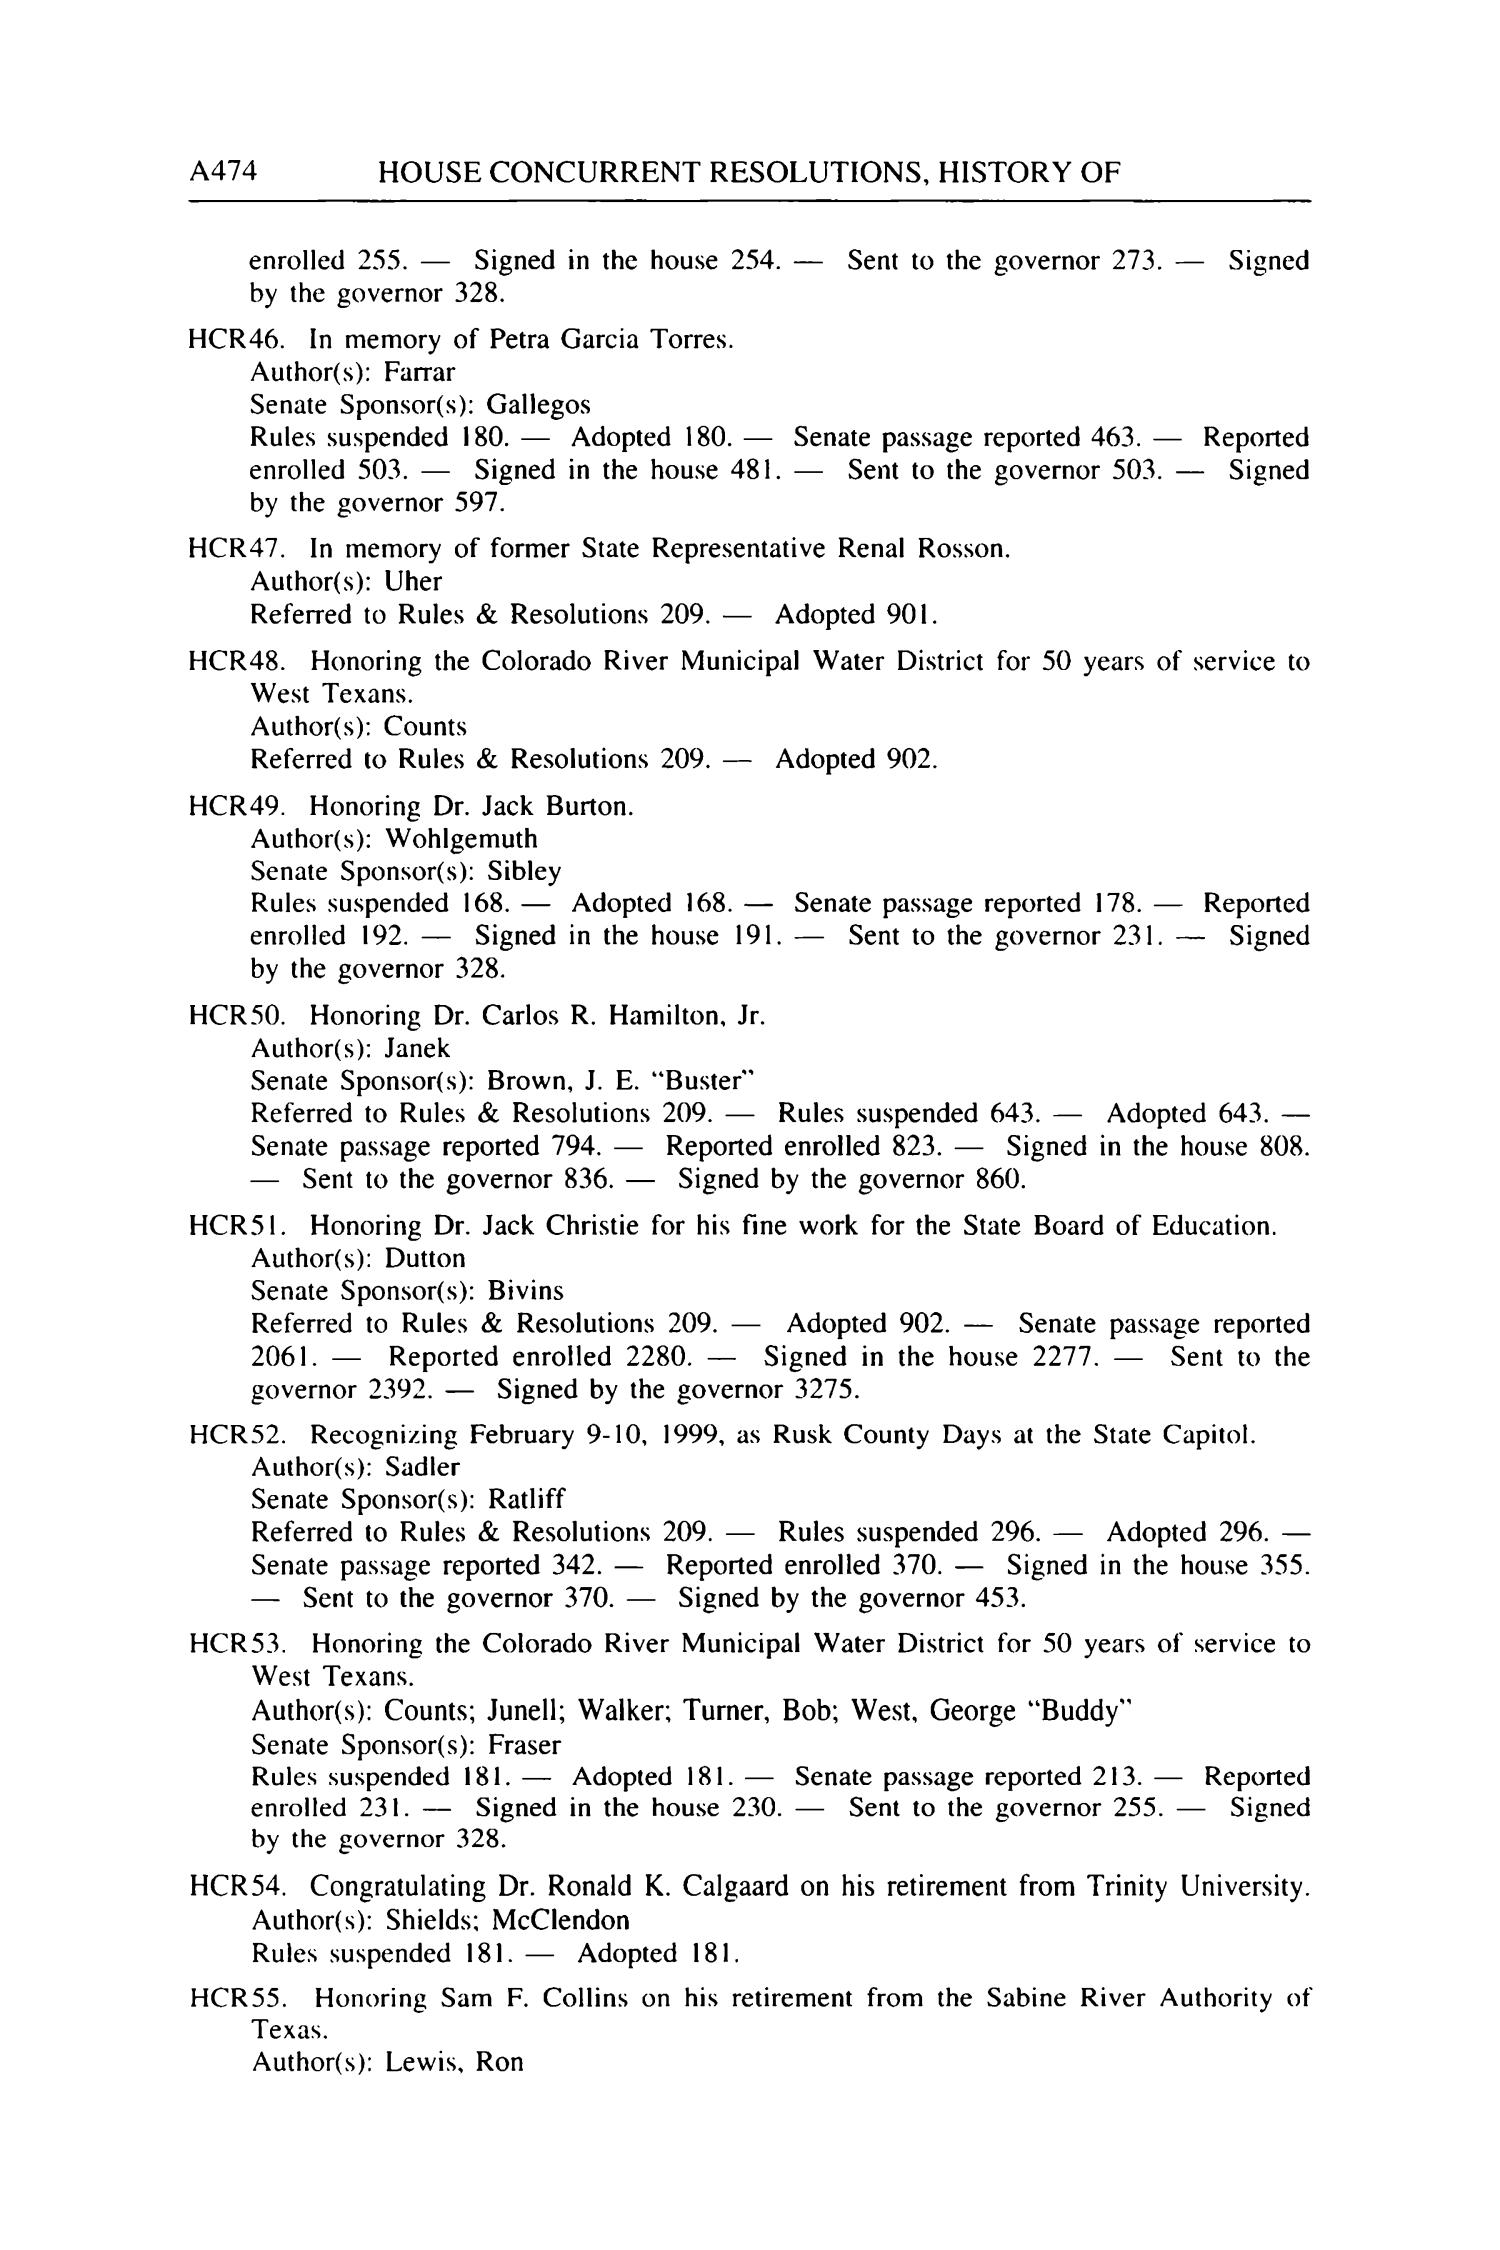 Journal of the House of Representatives of the Regular Session of the Seventy-Sixth Legislature of the State of Texas, Volume 5
                                                
                                                    A474
                                                